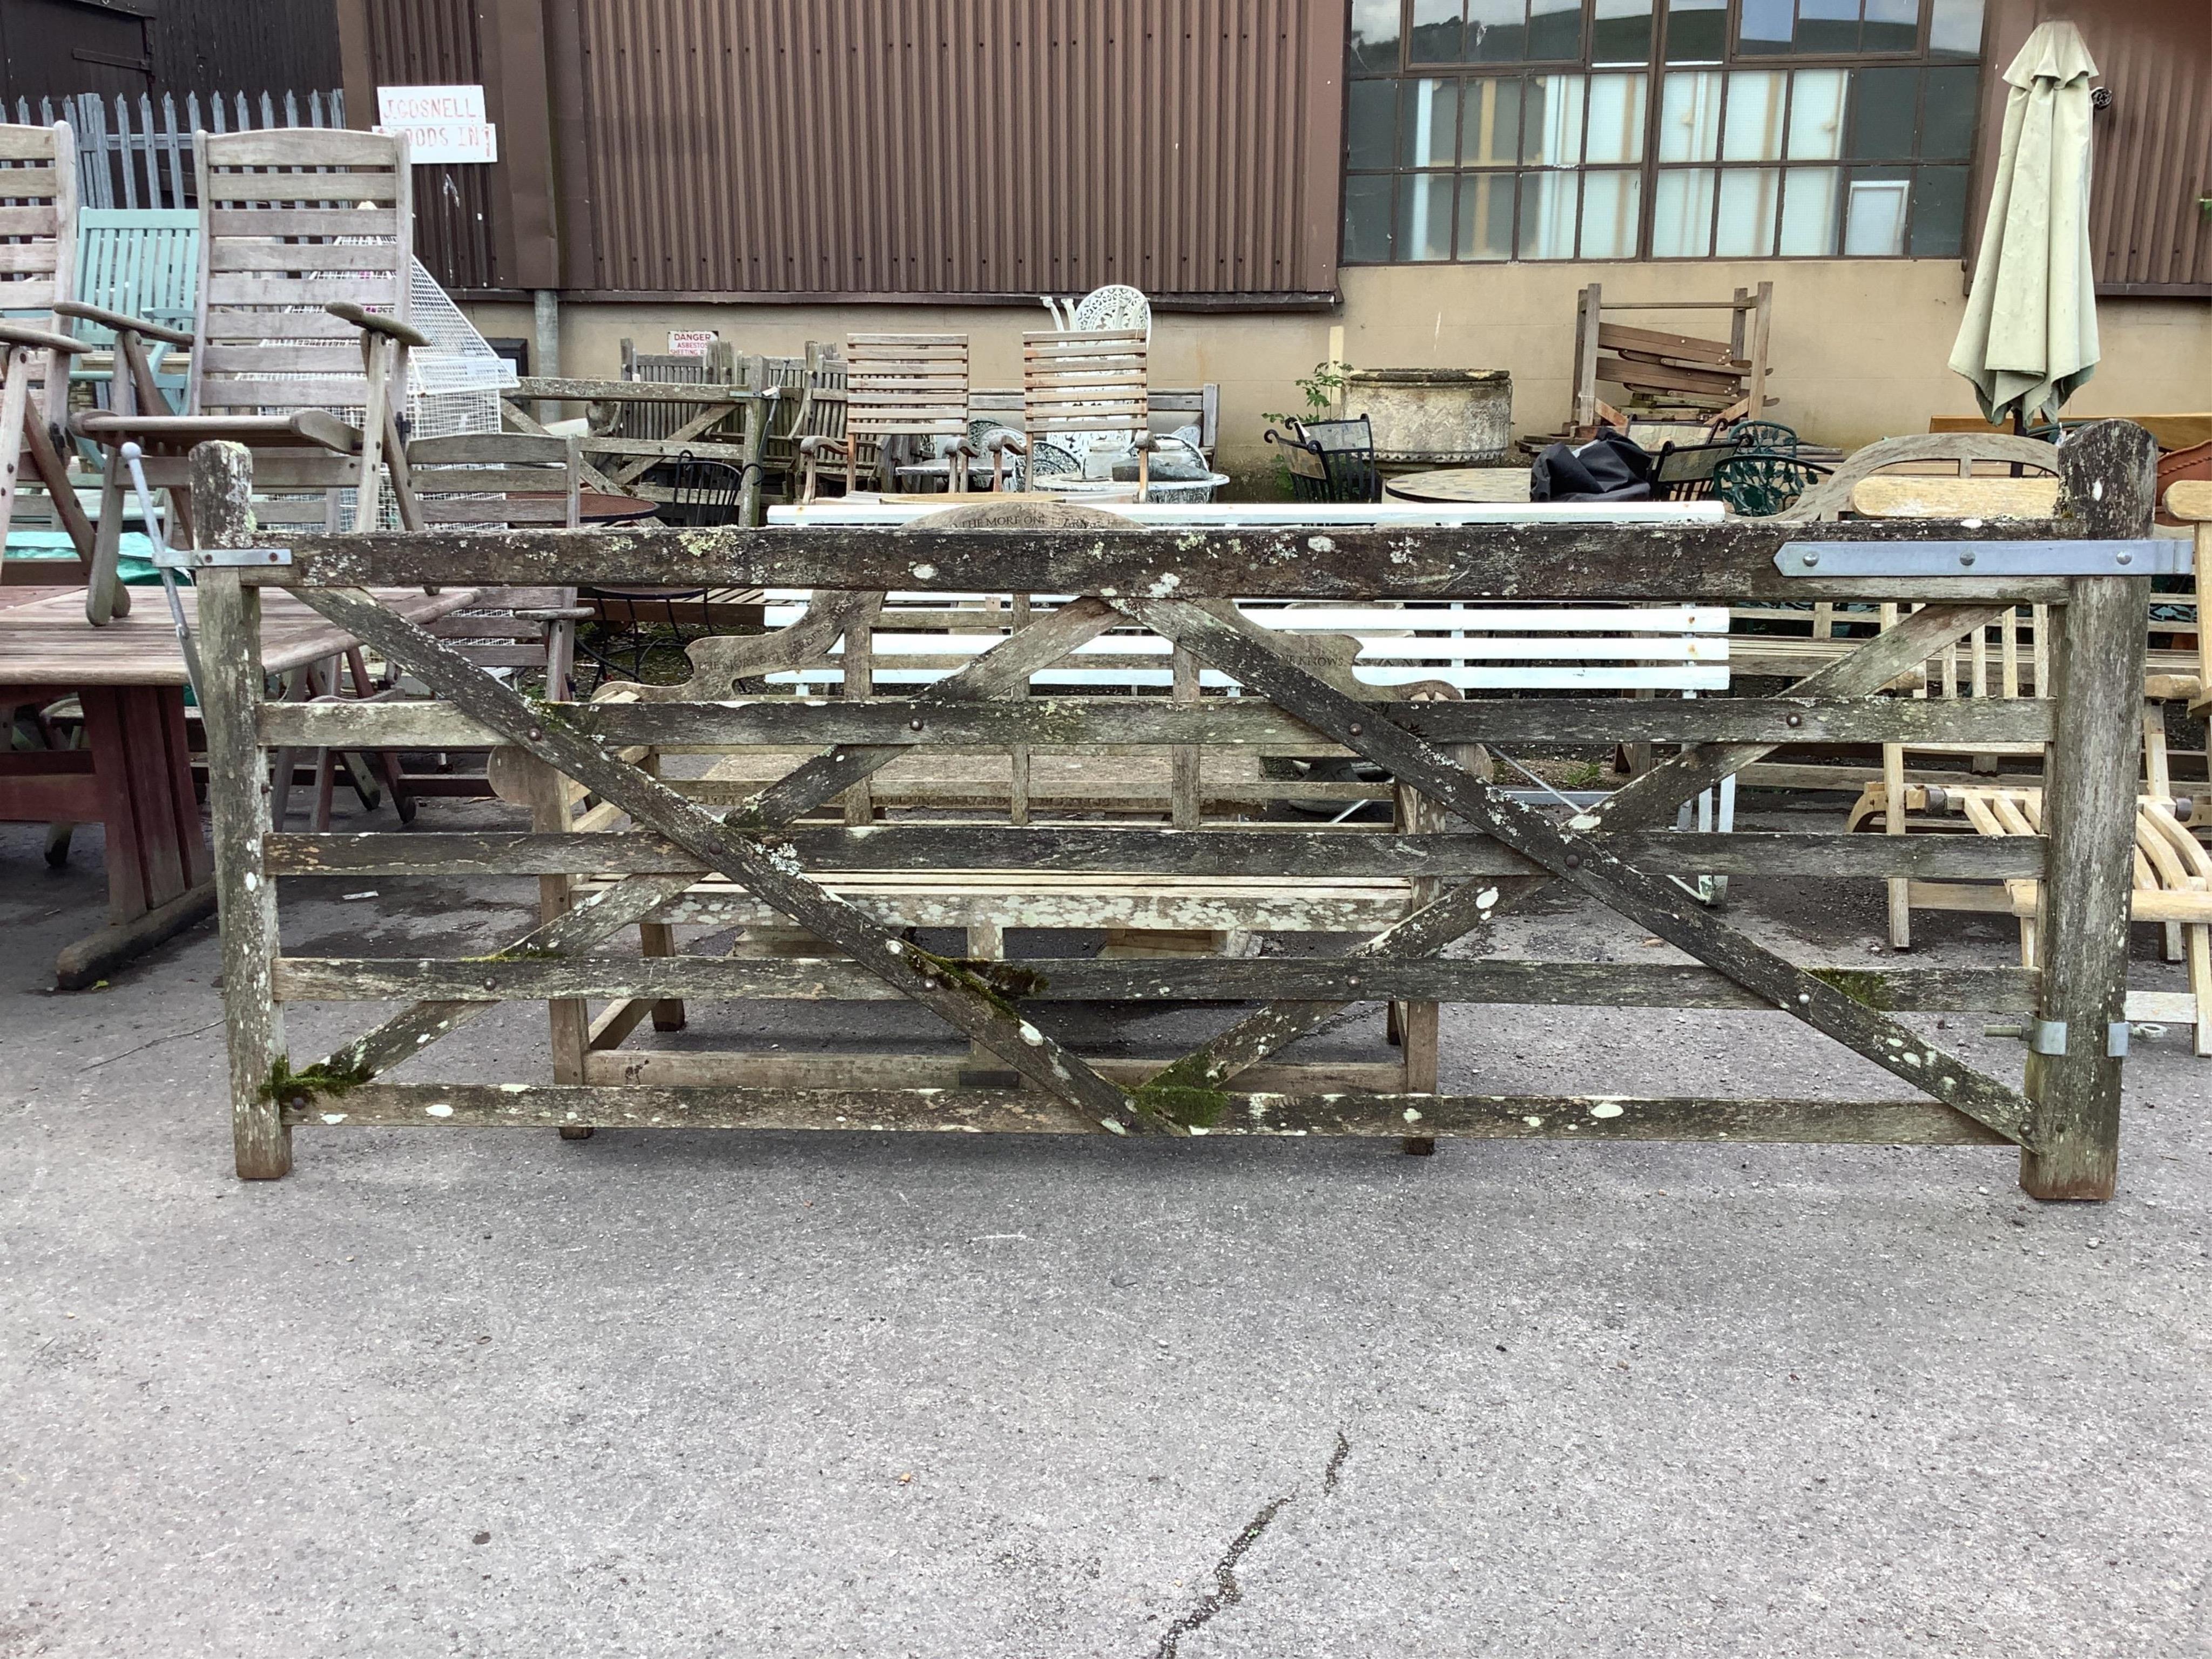 A pair of 10ft Biddenden hardwood gates with galvanised mounts